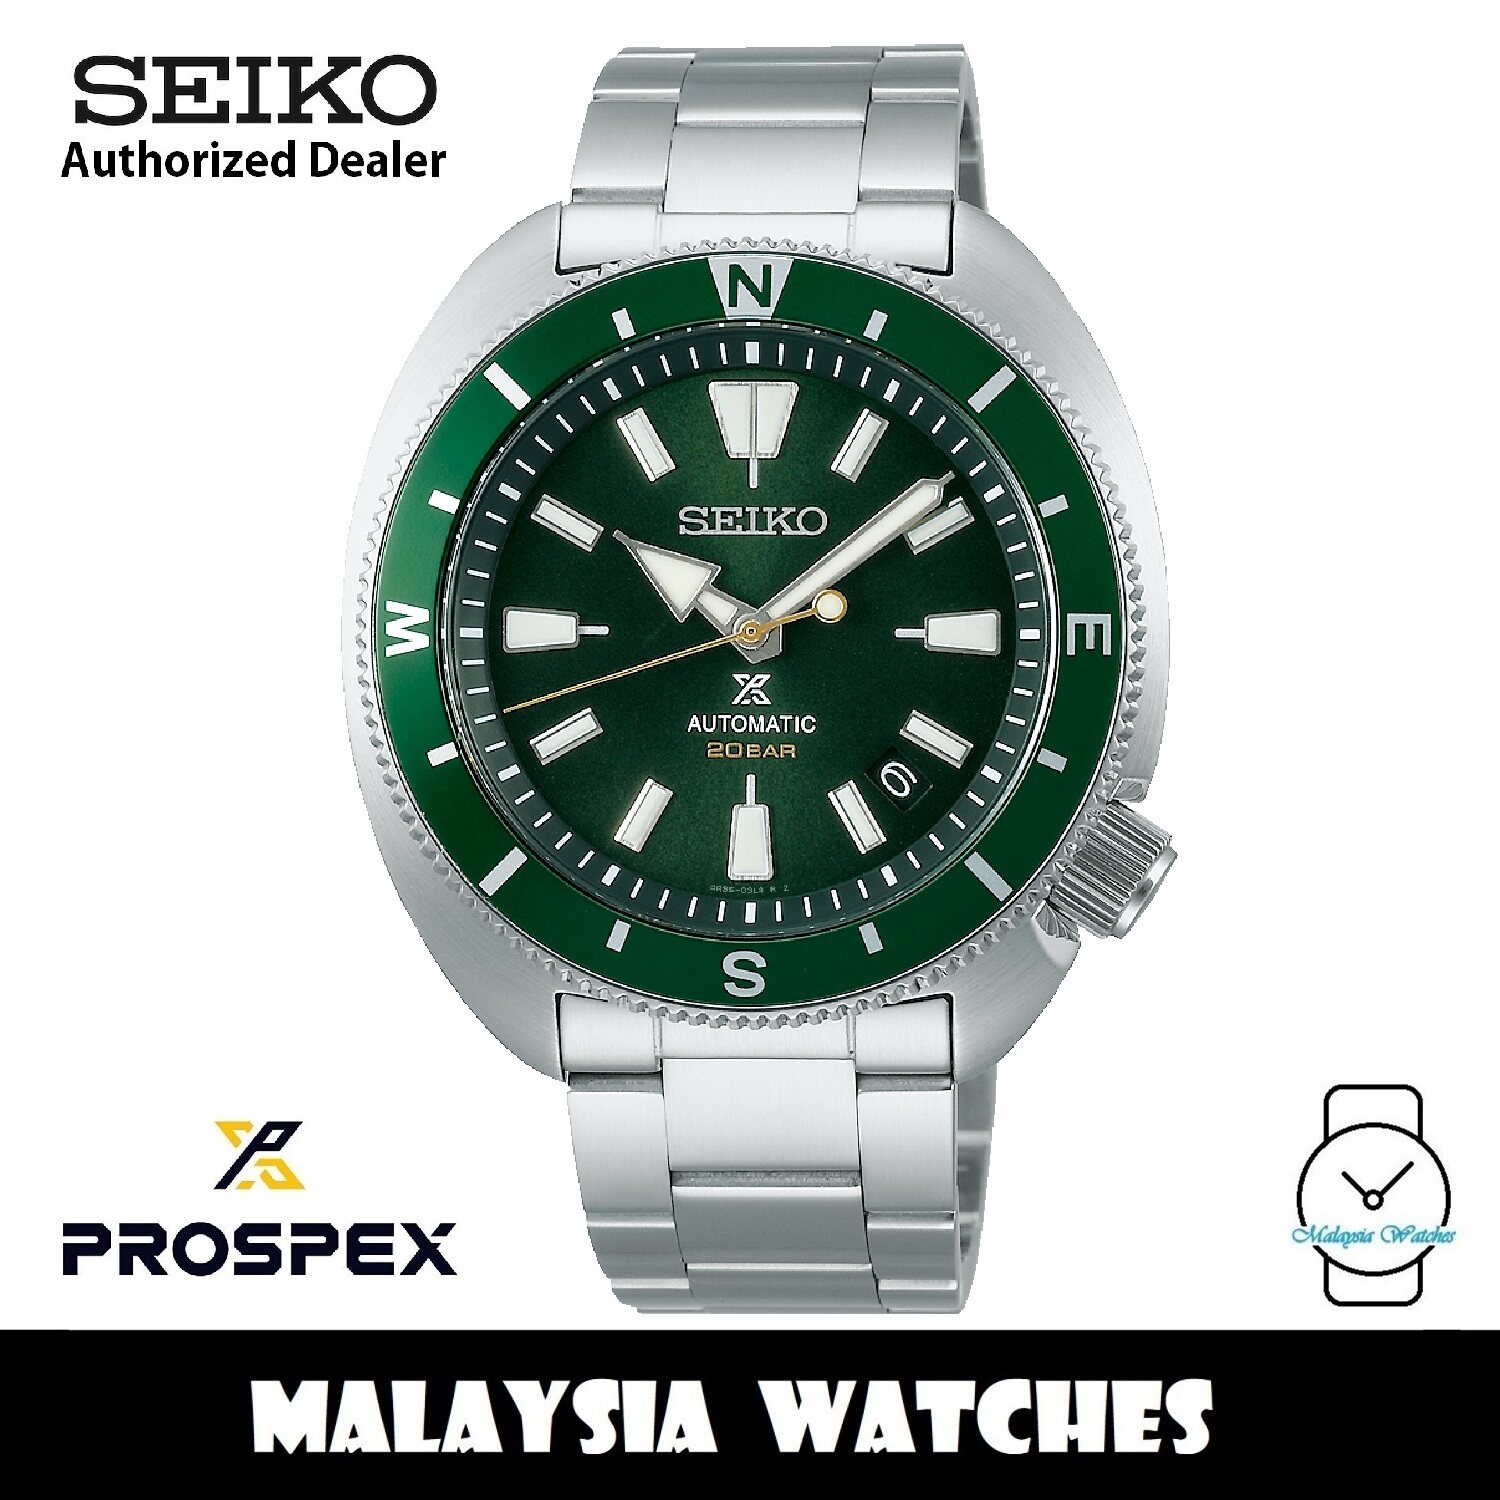 NEW) Seiko Prospex Sumo Diver's 200M SPB103J1 Made In Japan Sapphire  Crystal Green Dial Stainless Steel Watch SBDC081 | Lazada